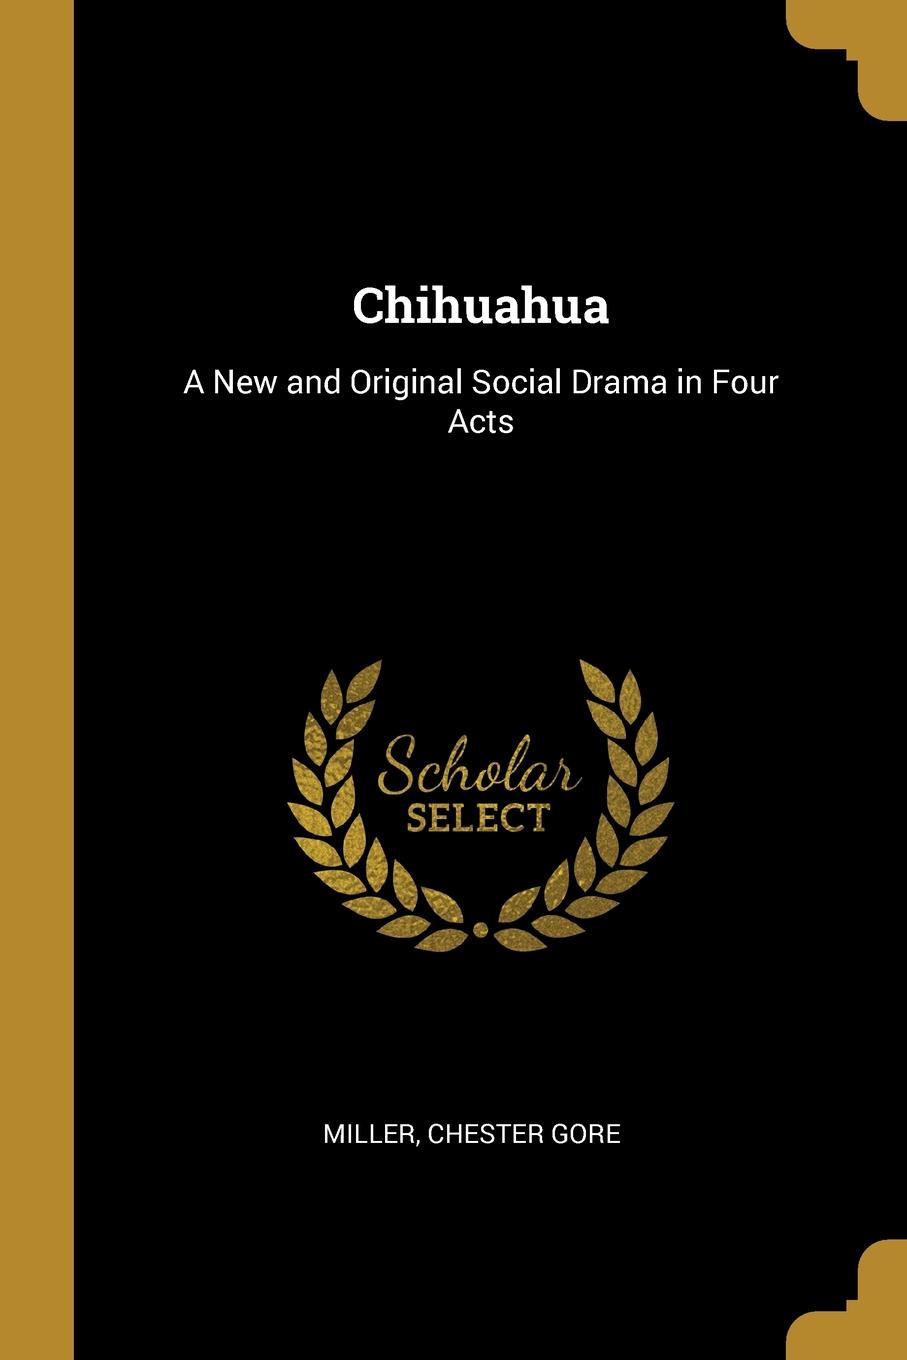 Chihuahua. A New and Original Social Drama in Four Acts